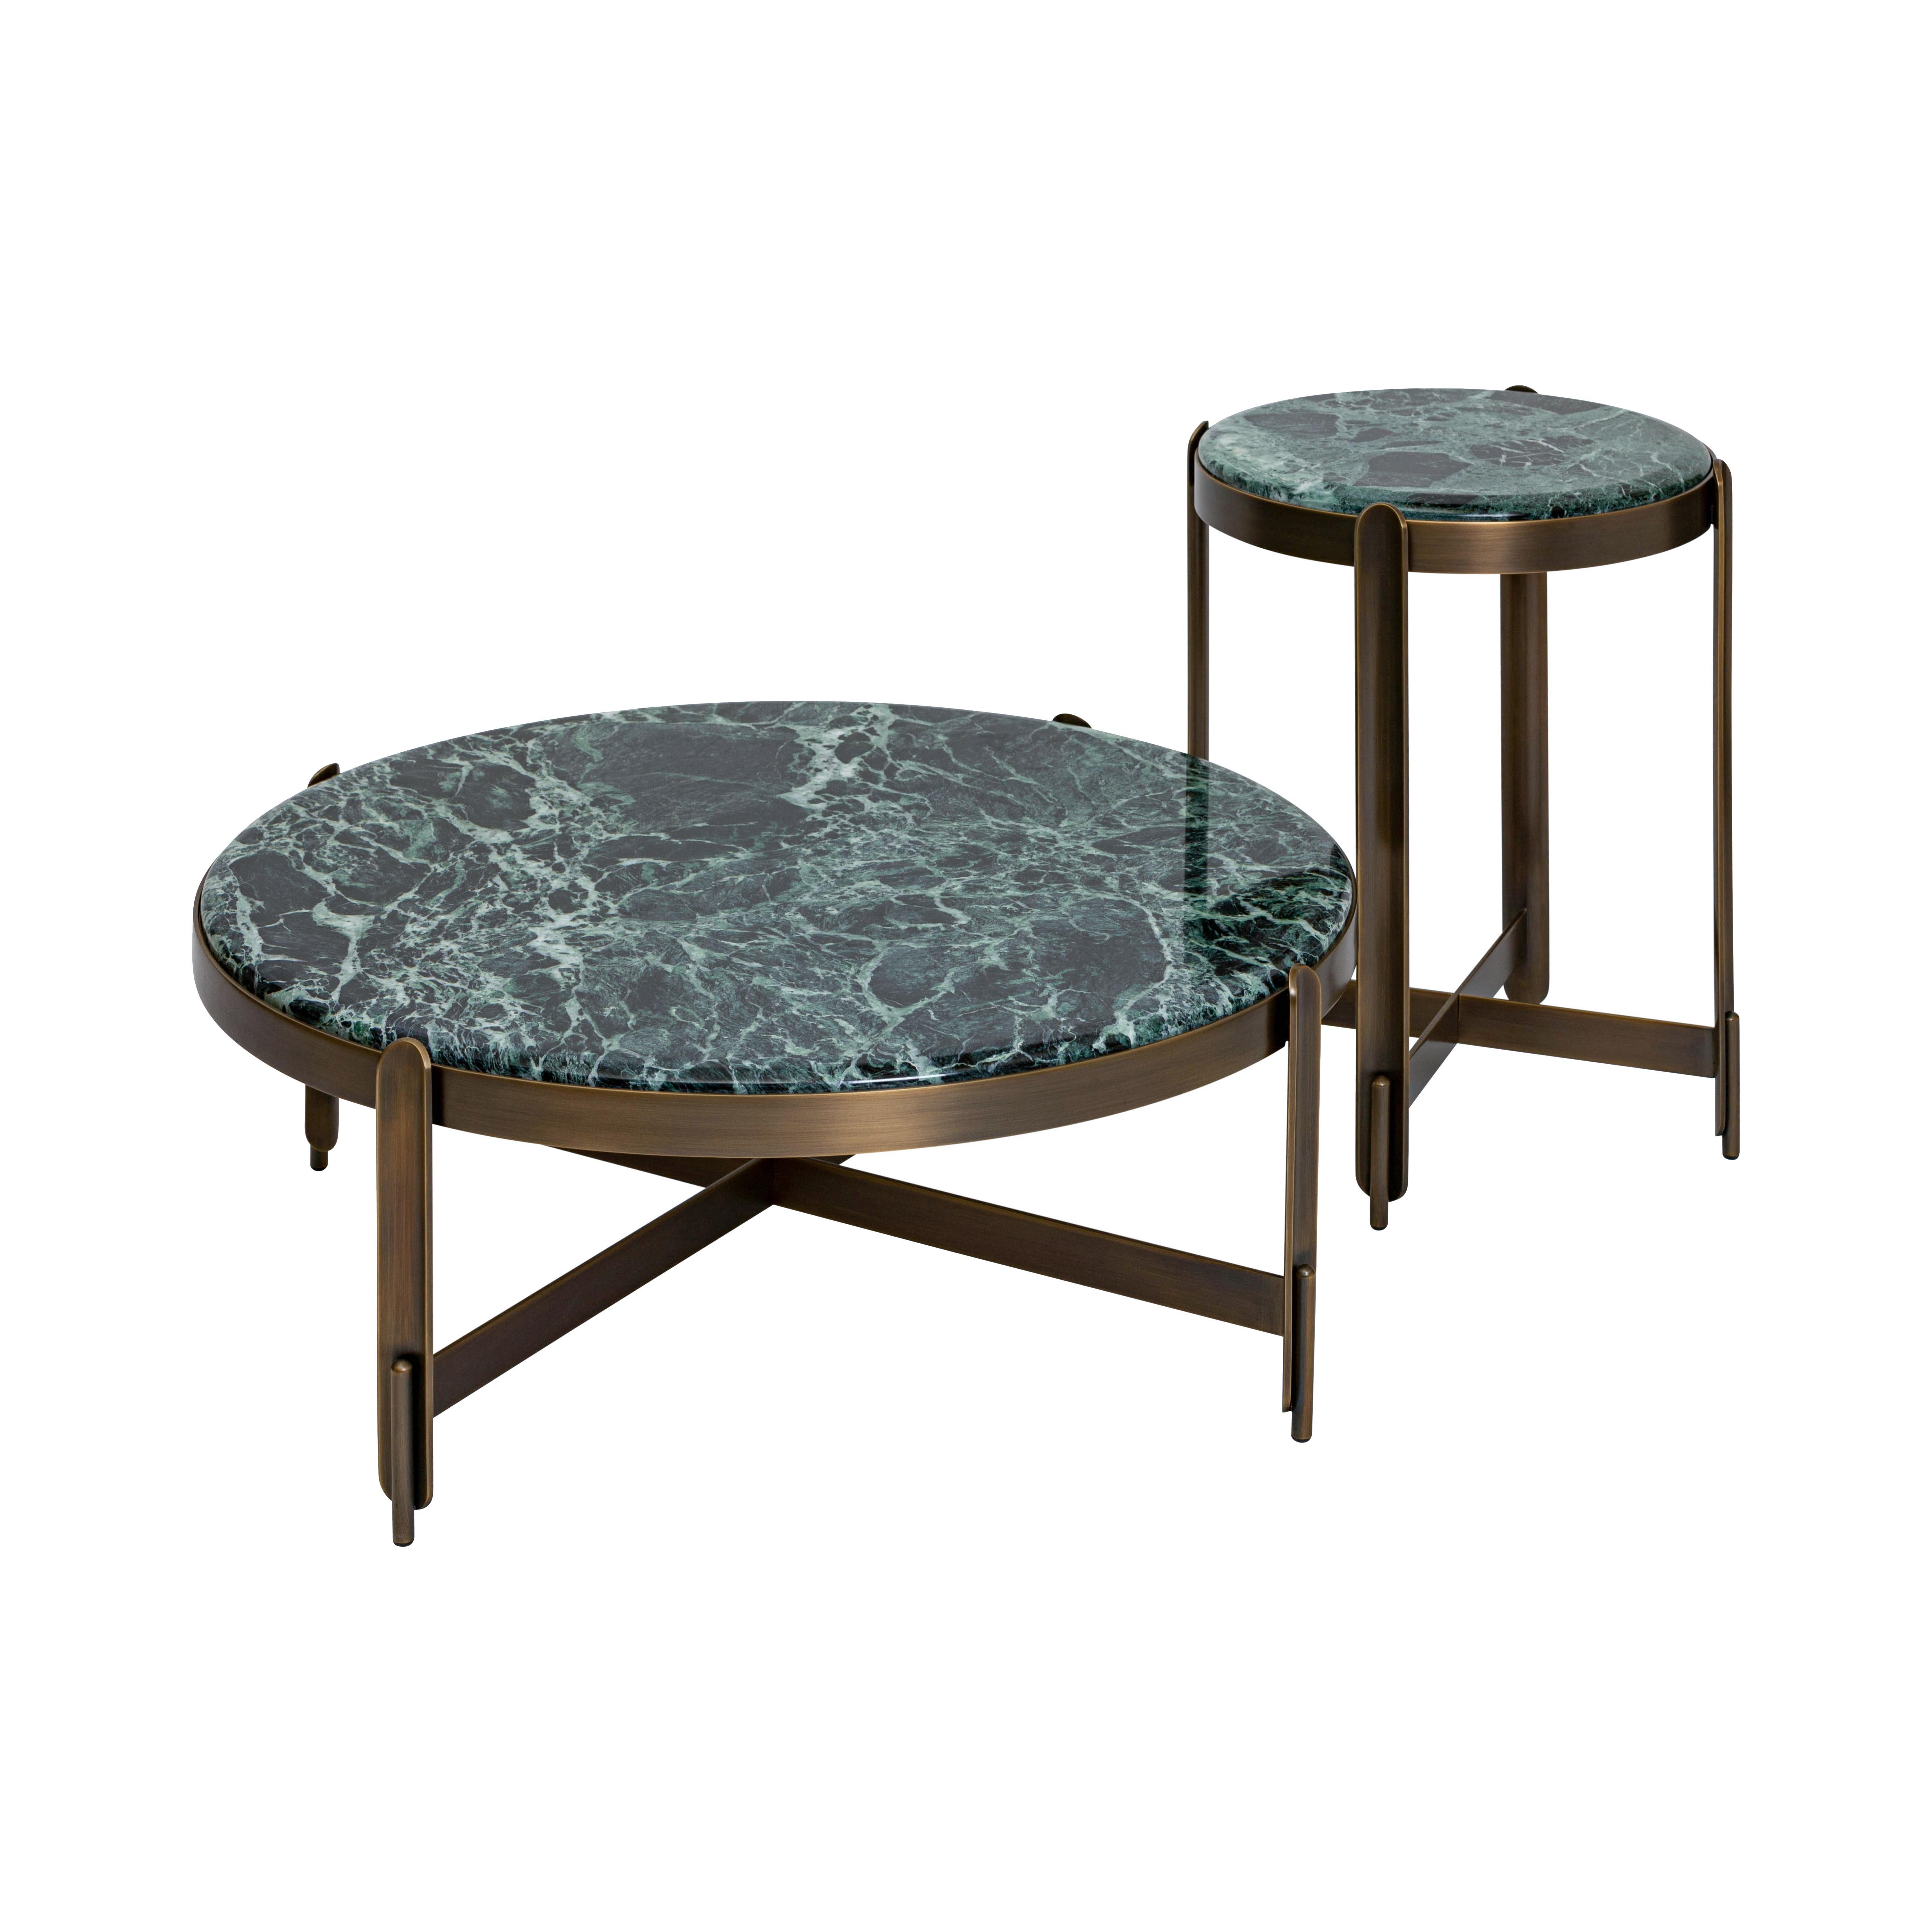 21st Century Art Deco Elie Saab Maison Green Alpine Bronze M Coffee Table, Italy In New Condition For Sale In Mariano Comense, CO